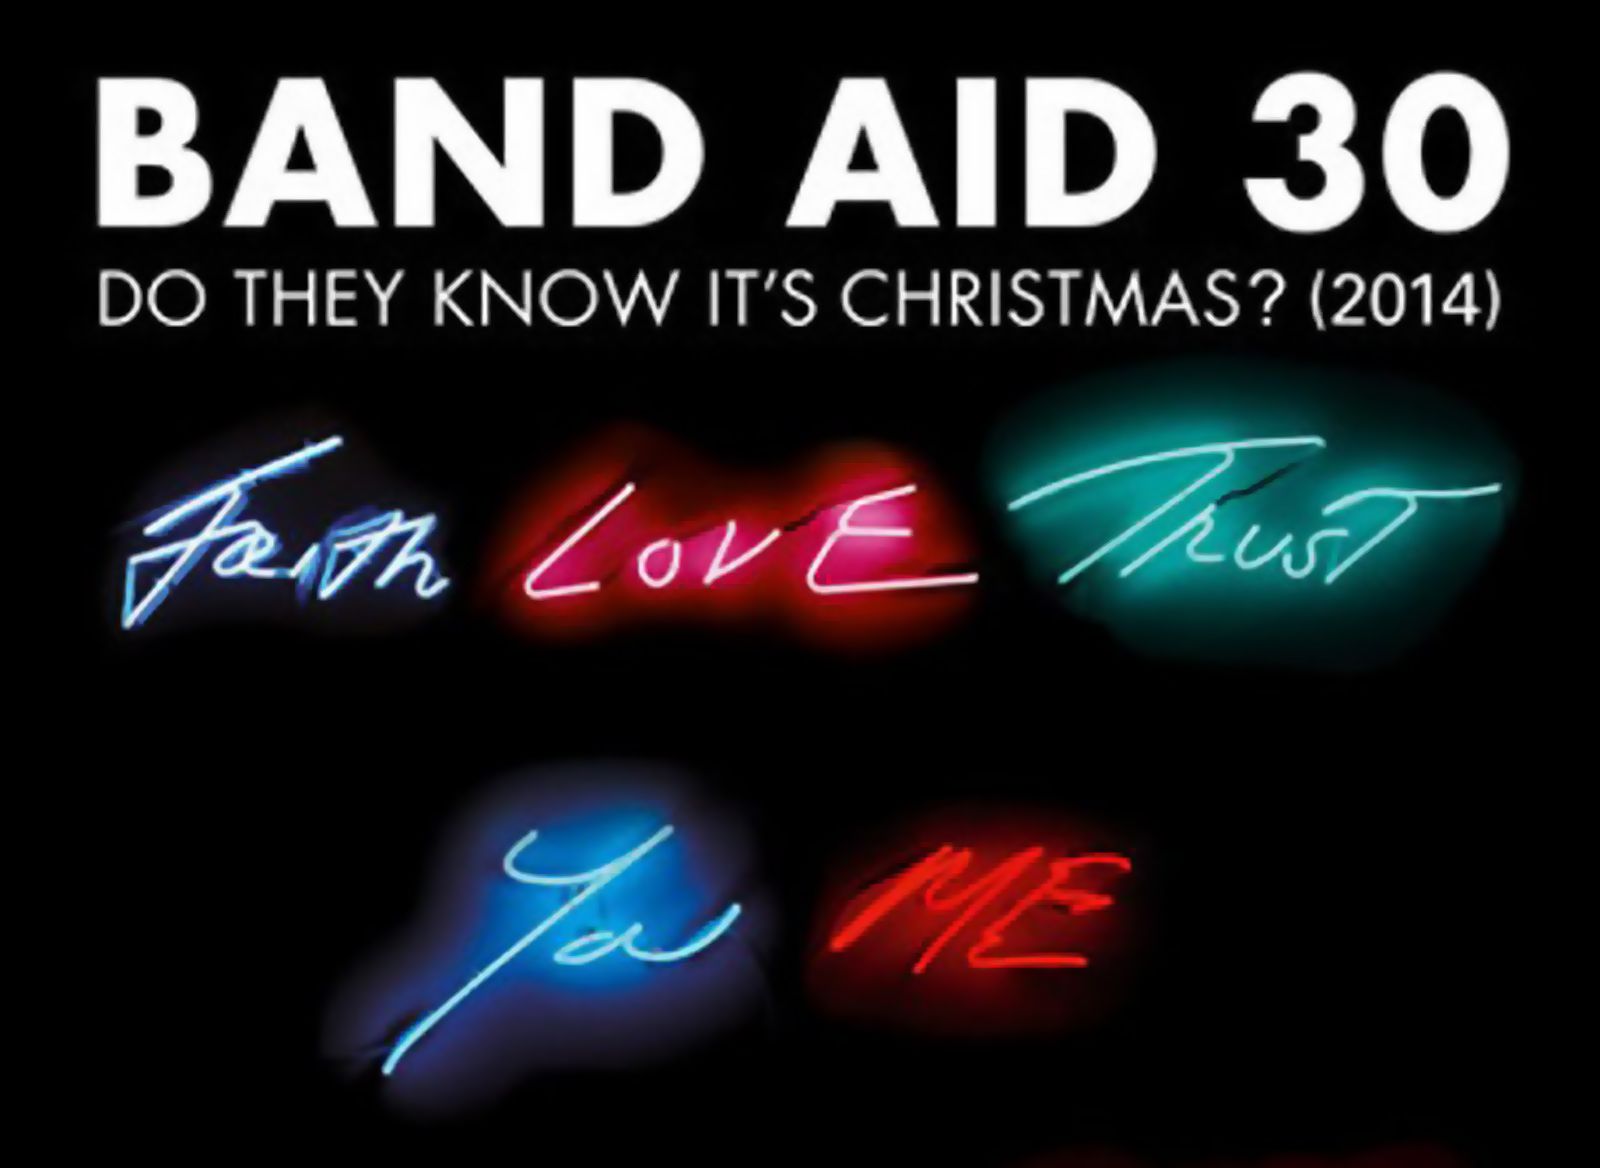 how to delete and buy again band aid 30 s do they know it s christmas image 1